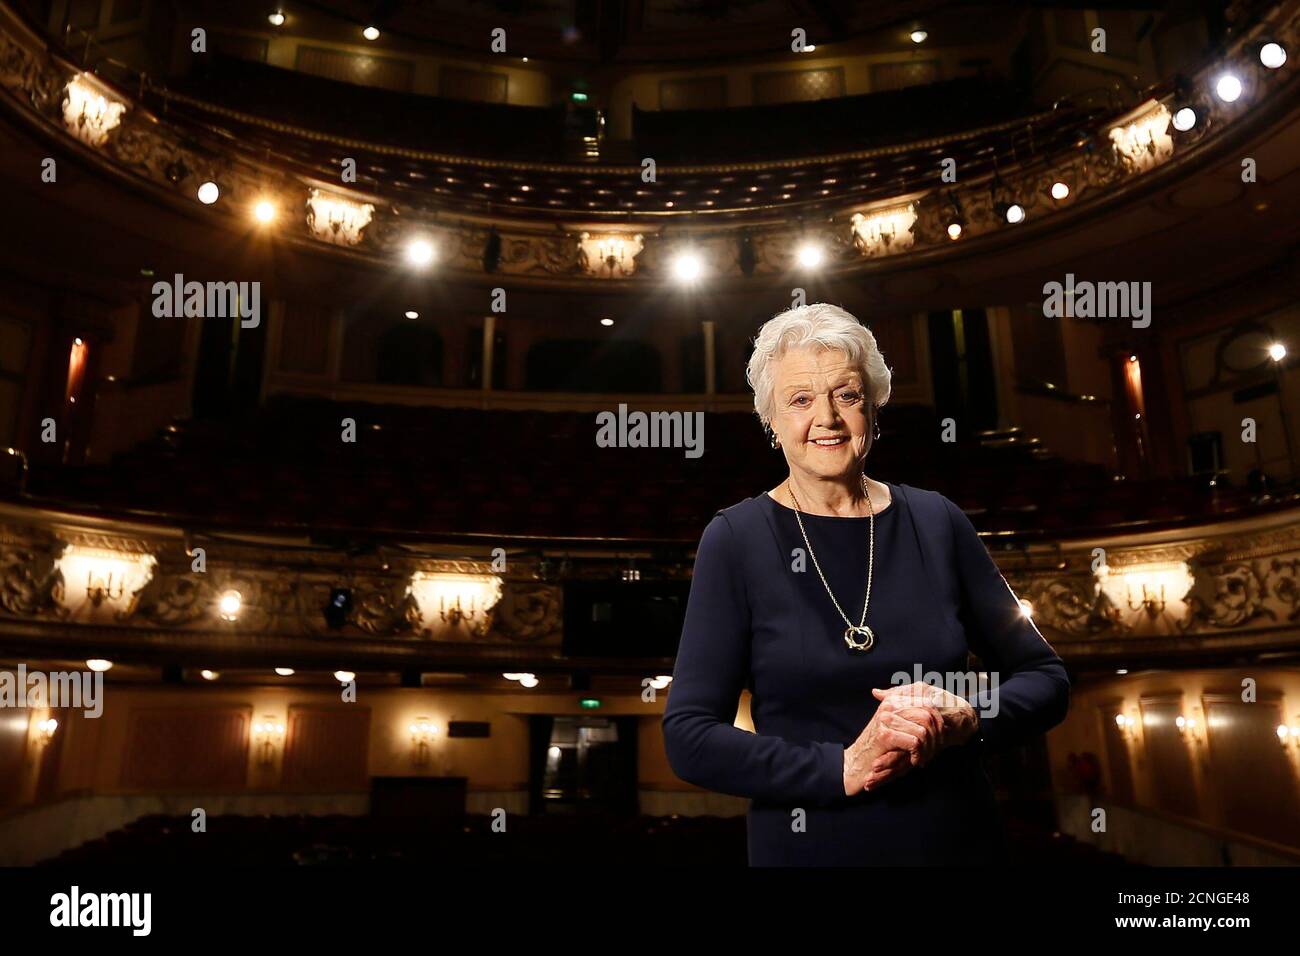 Actress Angela Lansbury poses for a photograph before a news conference at the Gielgud Theatre in central London January 23, 2014. Lansbury will return to the stage for the first time in 40 years.   REUTERS/Stefan Wermuth (BRITAIN - Tags: ENTERTAINMENT SOCIETY) Banque D'Images